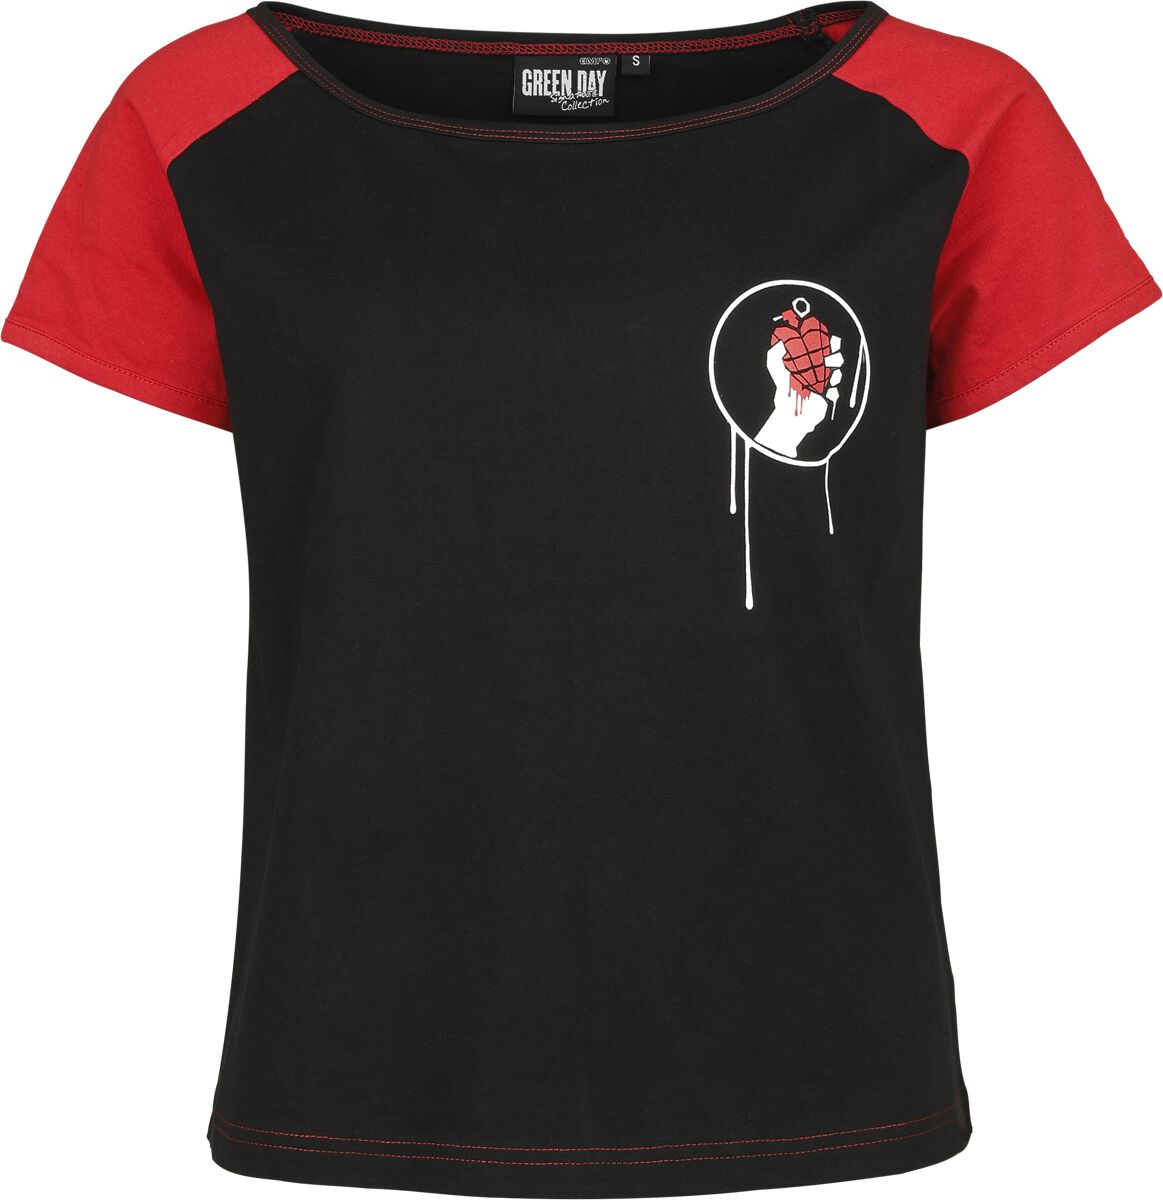 Image of T-Shirt di Green Day - EMP Signature Collection - XS a XXL - Donna - nero/rosso